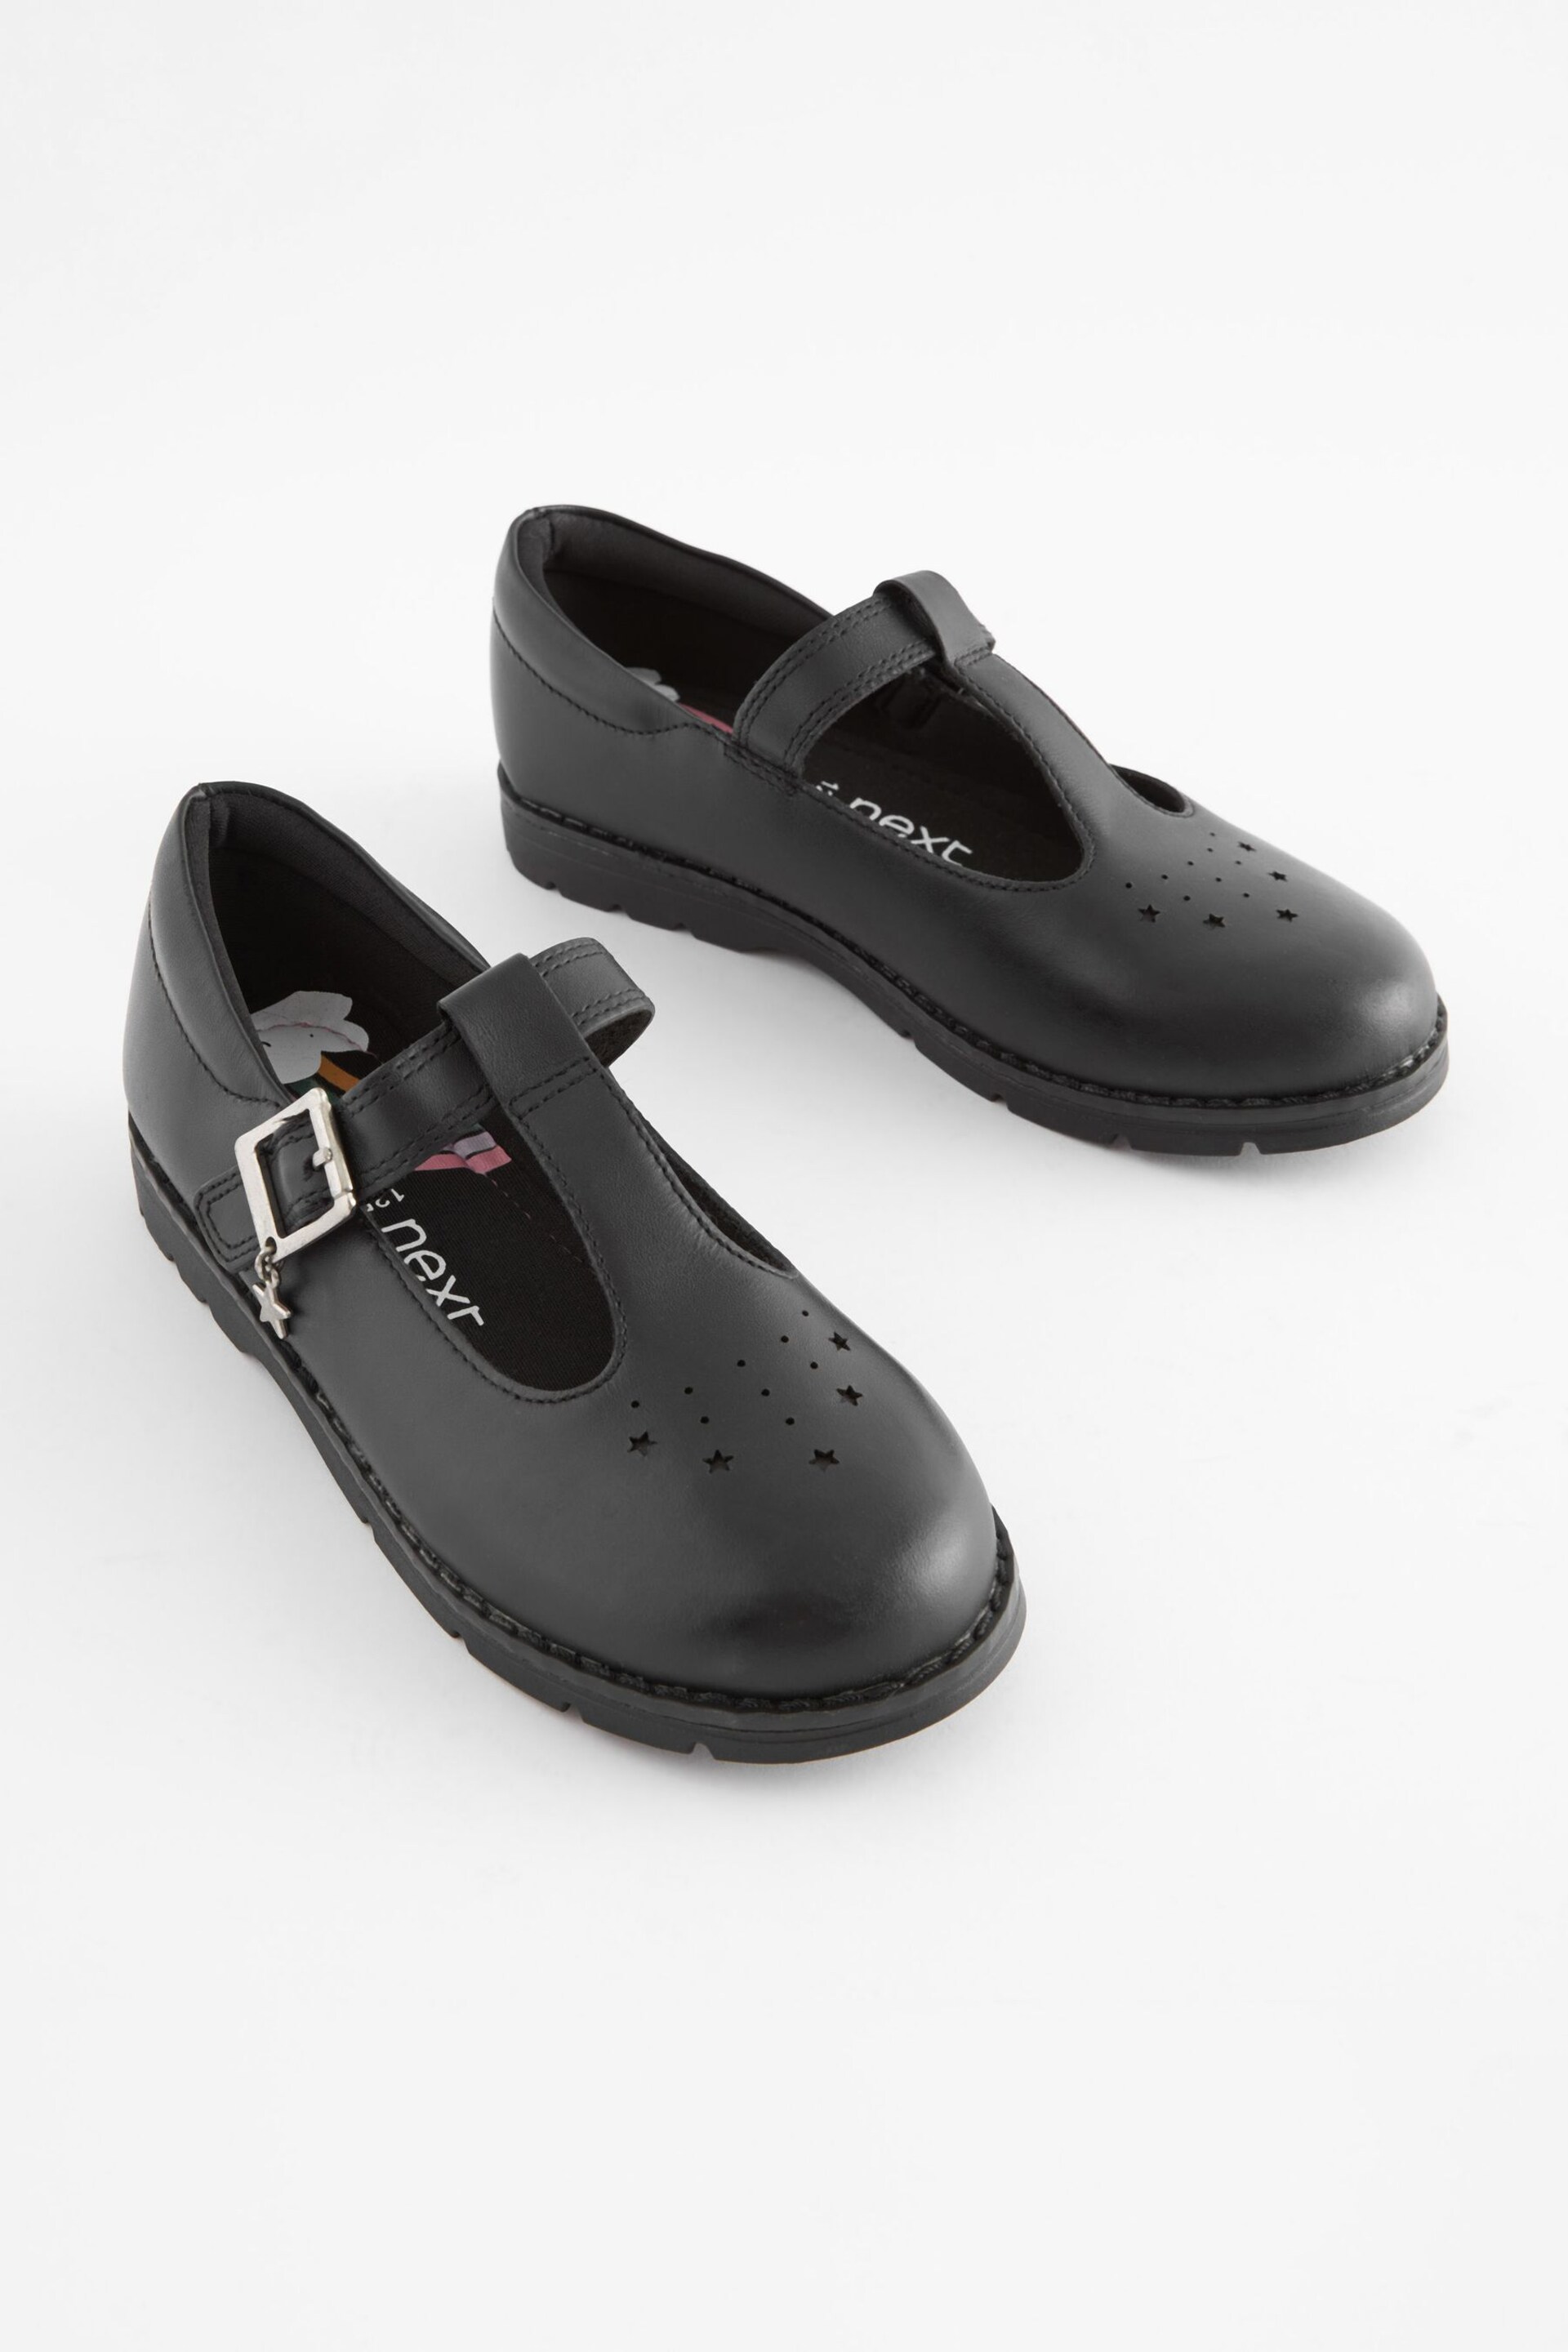 Black Standard Fit (F) Leather Junior T-Bar School Shoes - Image 1 of 5